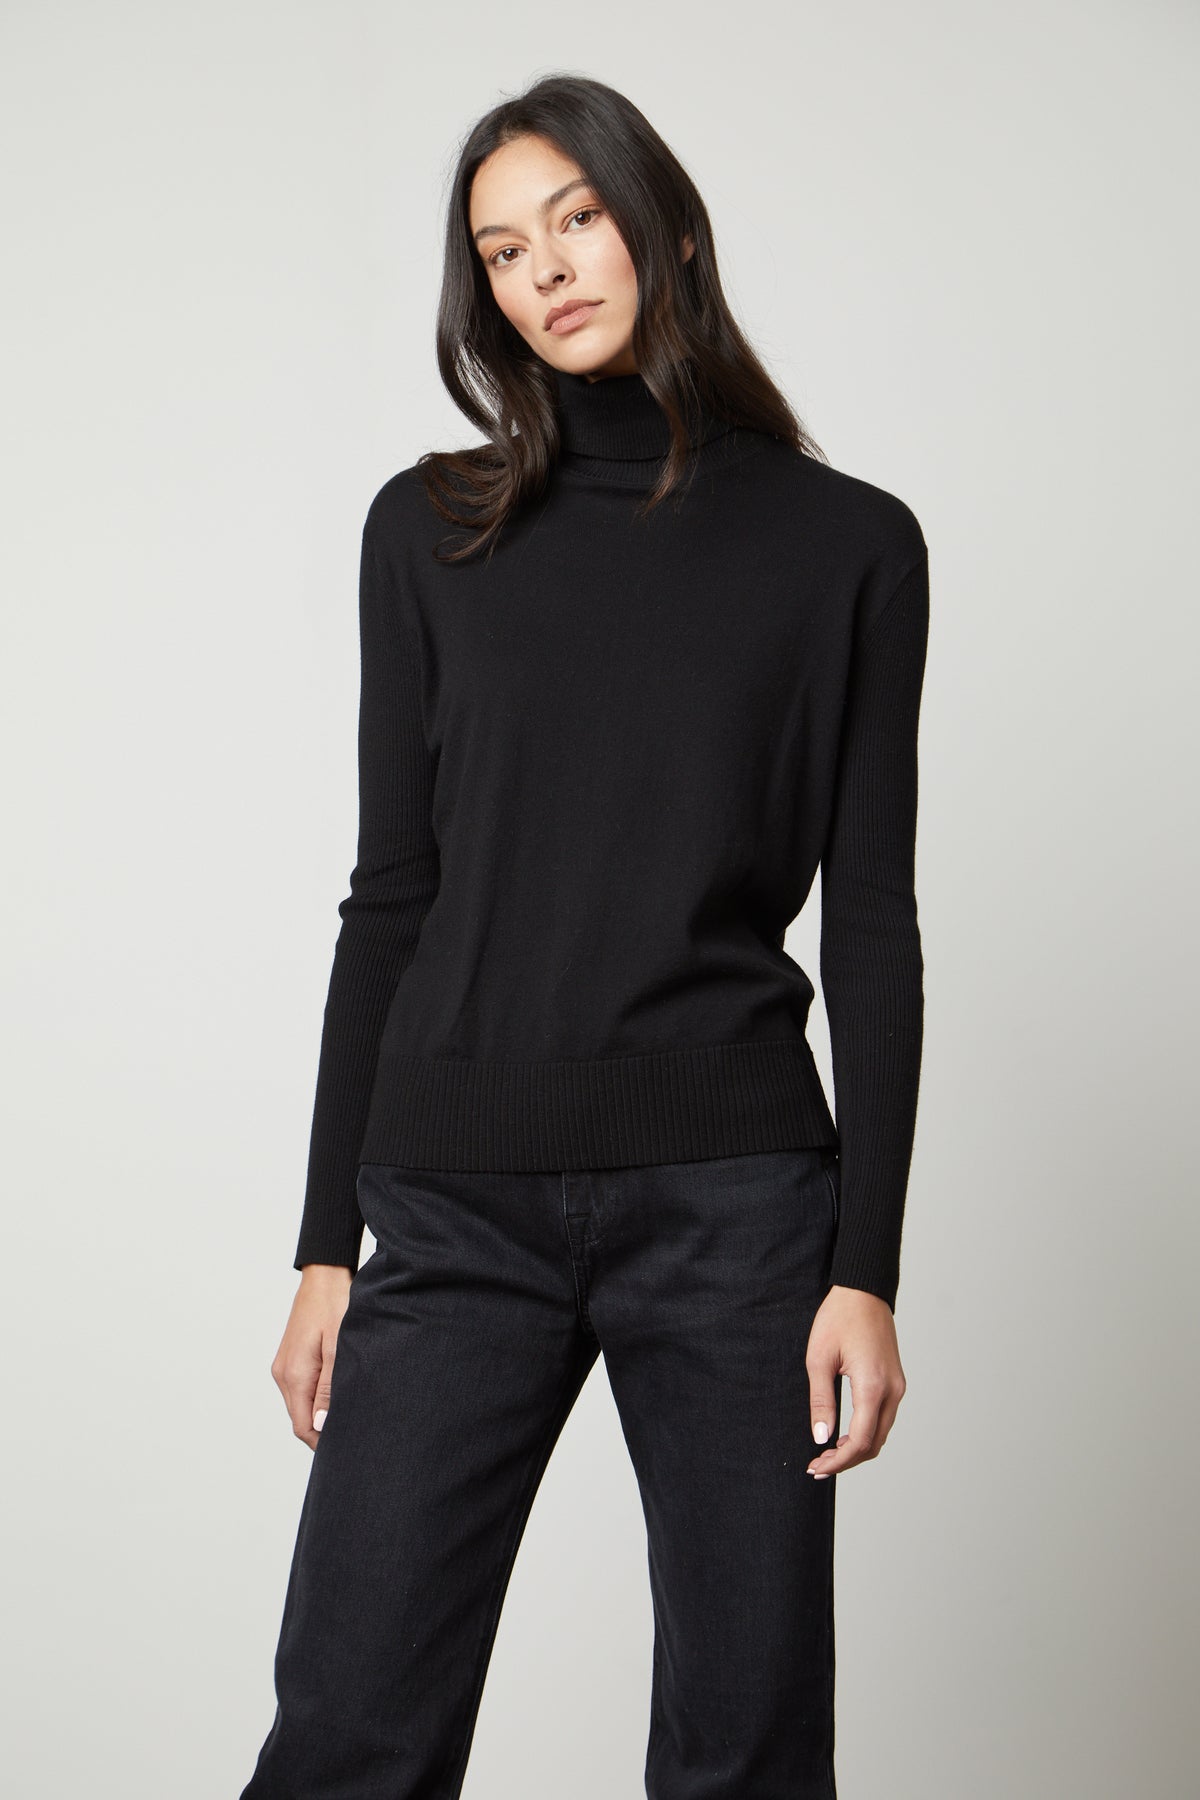 A woman wearing a Velvet by Graham & Spencer Sally Mock Neck Sweater and black jeans.-35503512813761